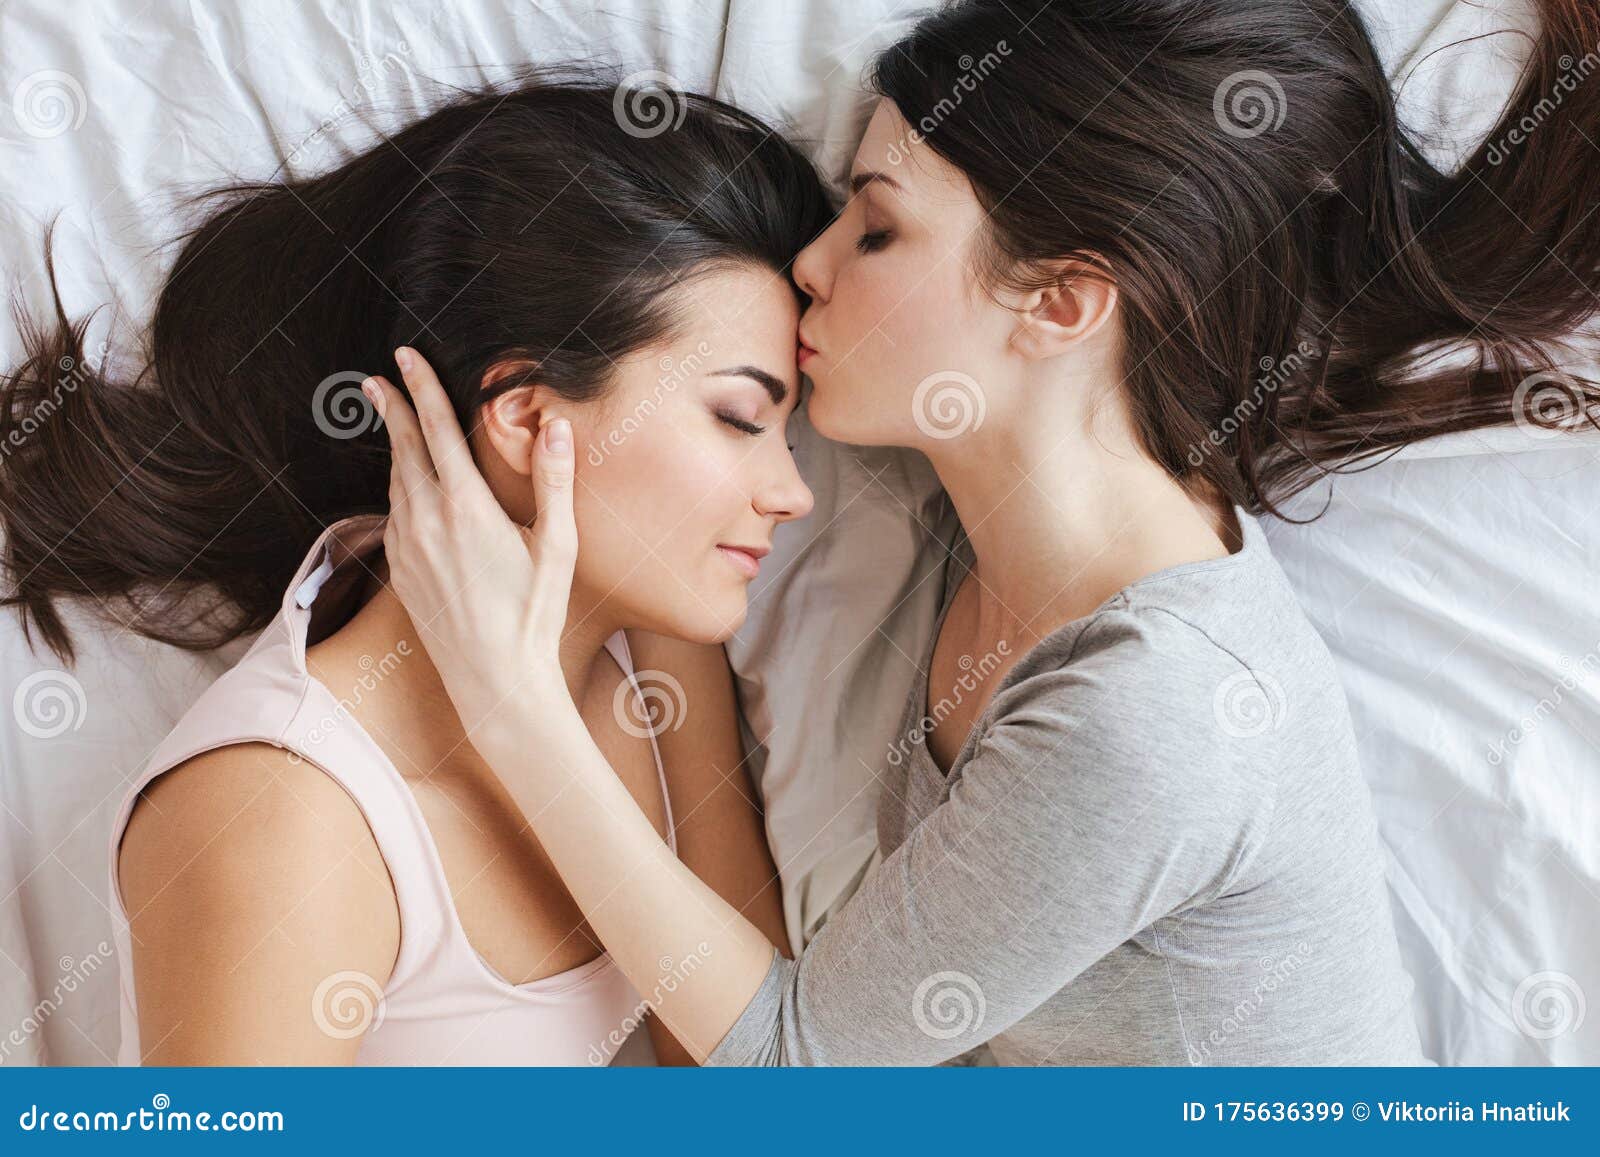 Lesbian Kissing On Bed